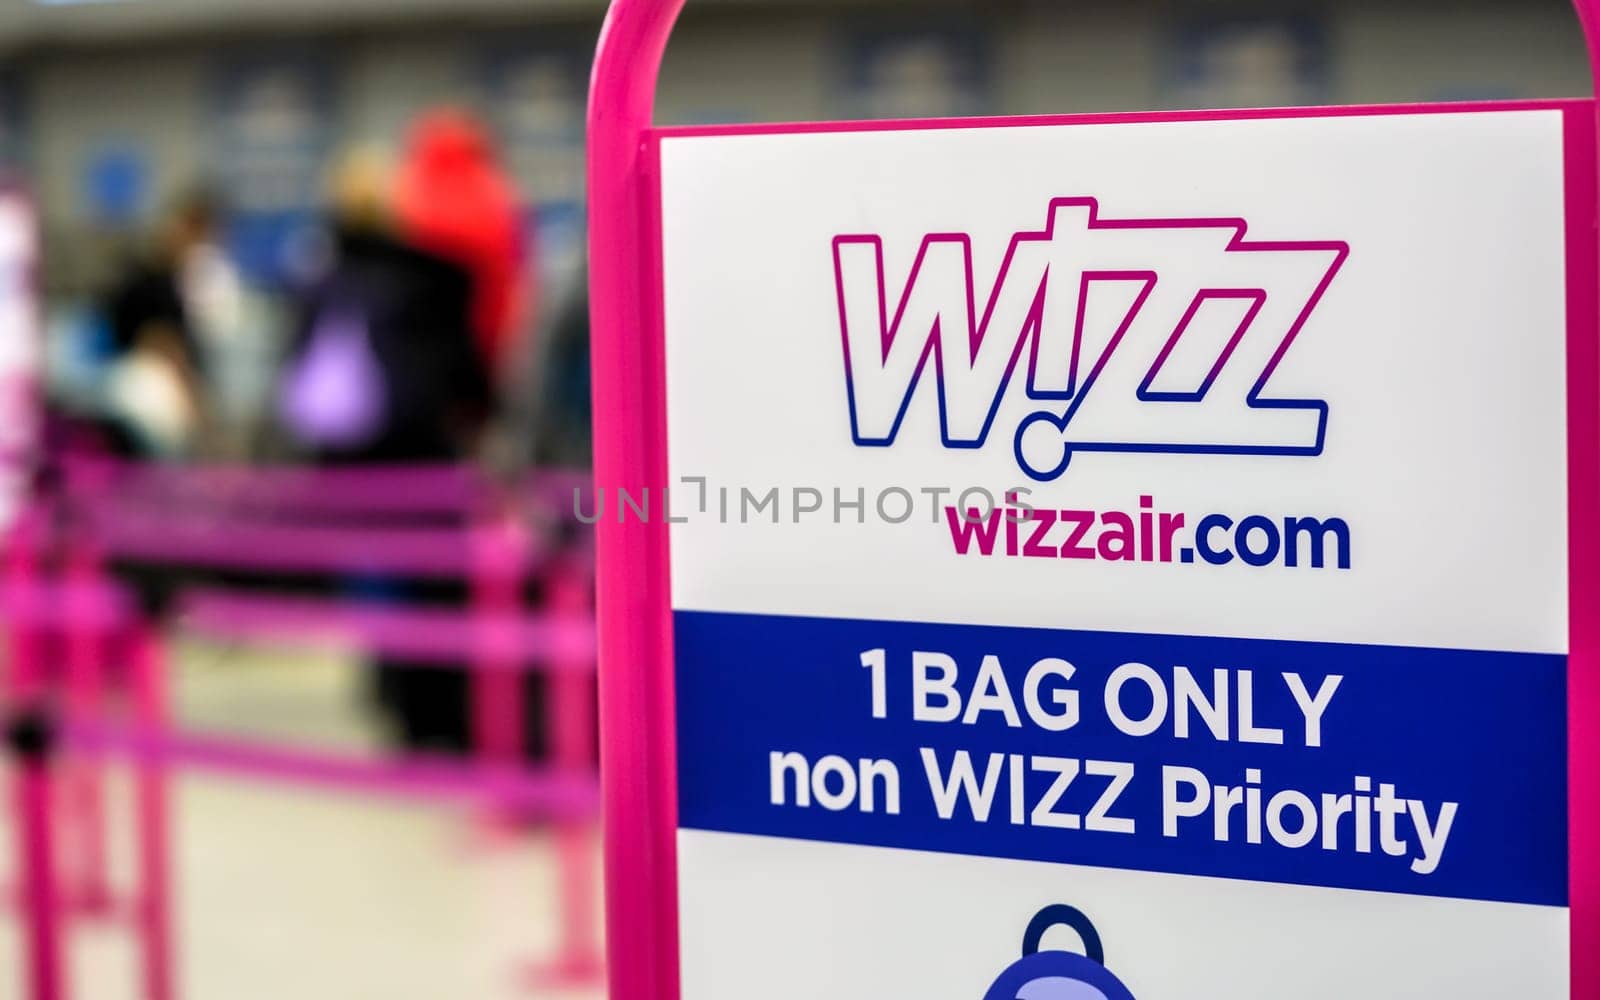 London, United Kingdom - February 05, 2019: Wizzair info table about maximum baggage size, blurred people at check in desks in background Wizz is Hungarian low cost operator founded in 2003